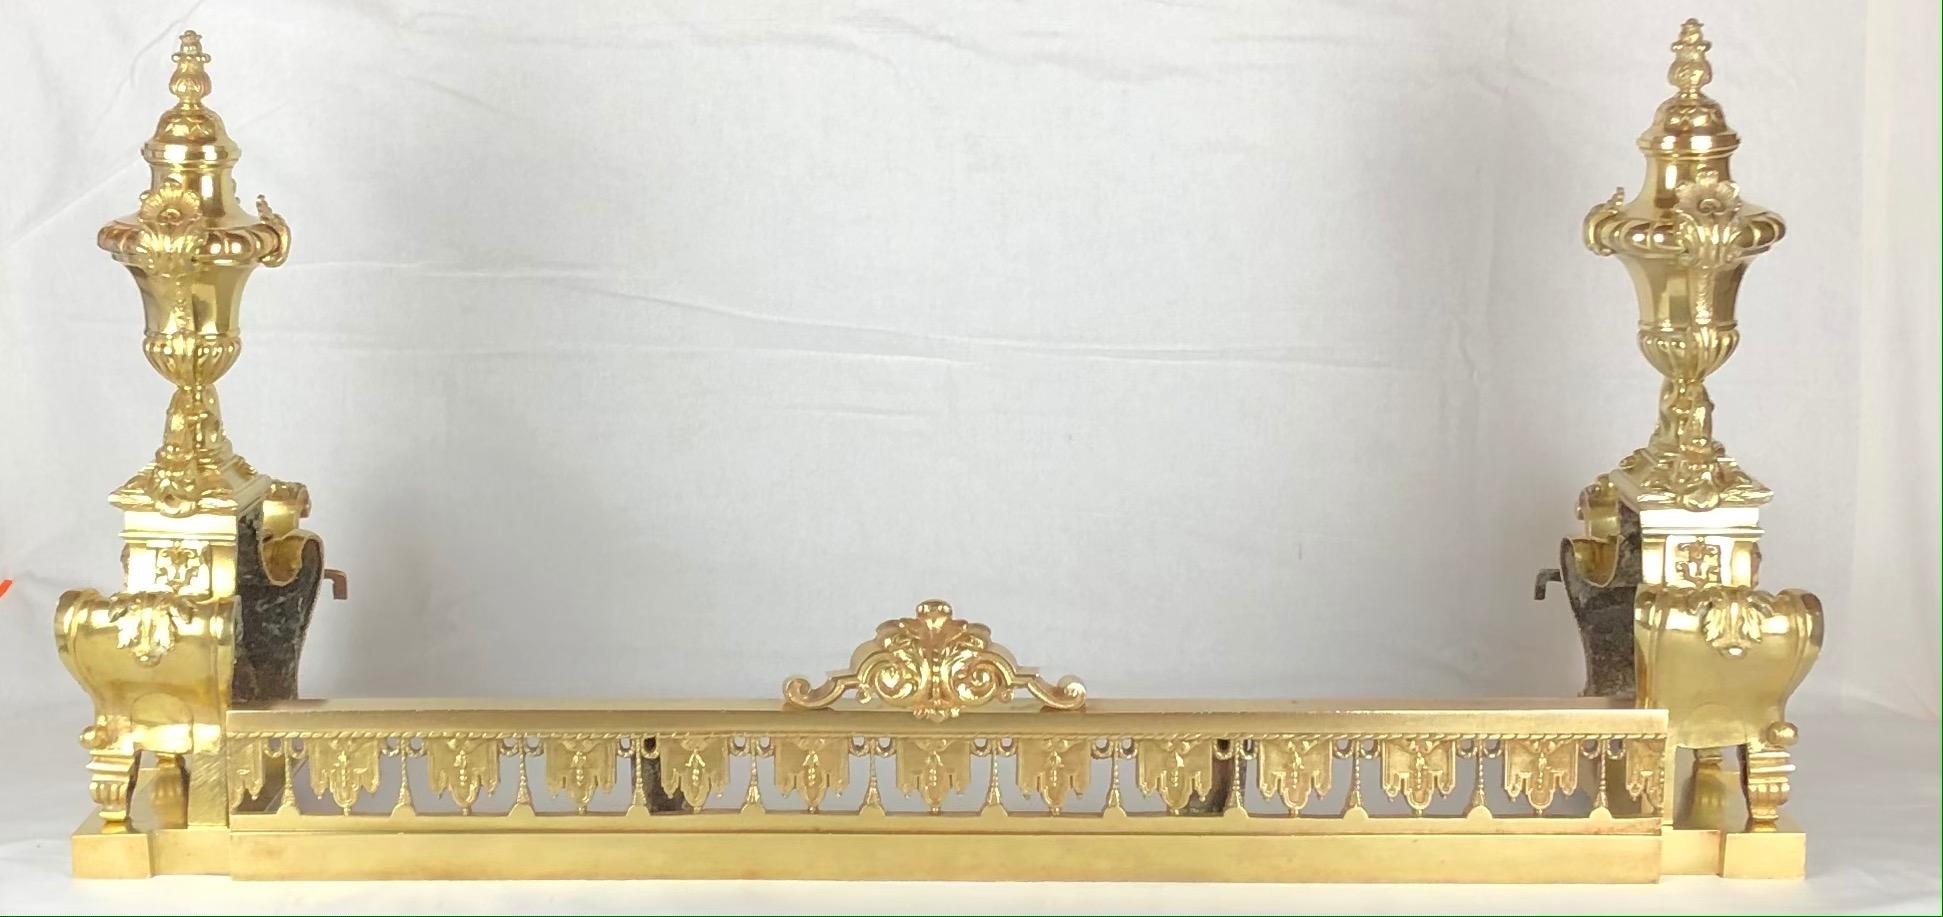 Exquisite French Louis XVI gilded bronze andirons or chenets with centered urn having festoons (flowers, foliage and fruit) through each side with a flame finial tops.

This pair of beautifully crafted chenets, retain their original gilding which